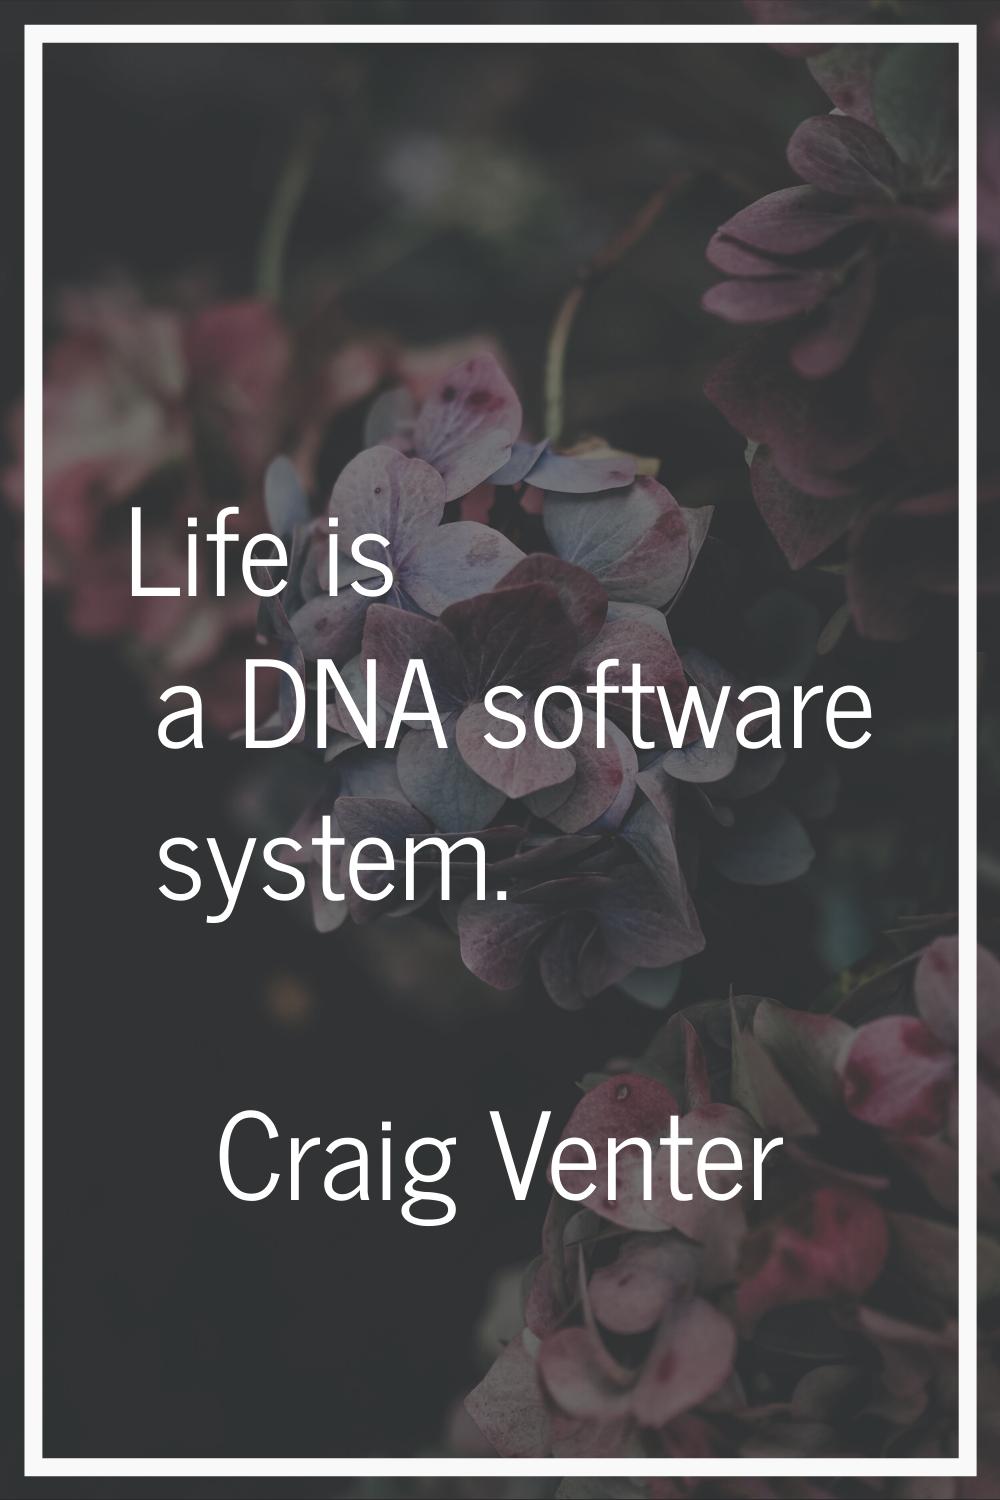 Life is a DNA software system.